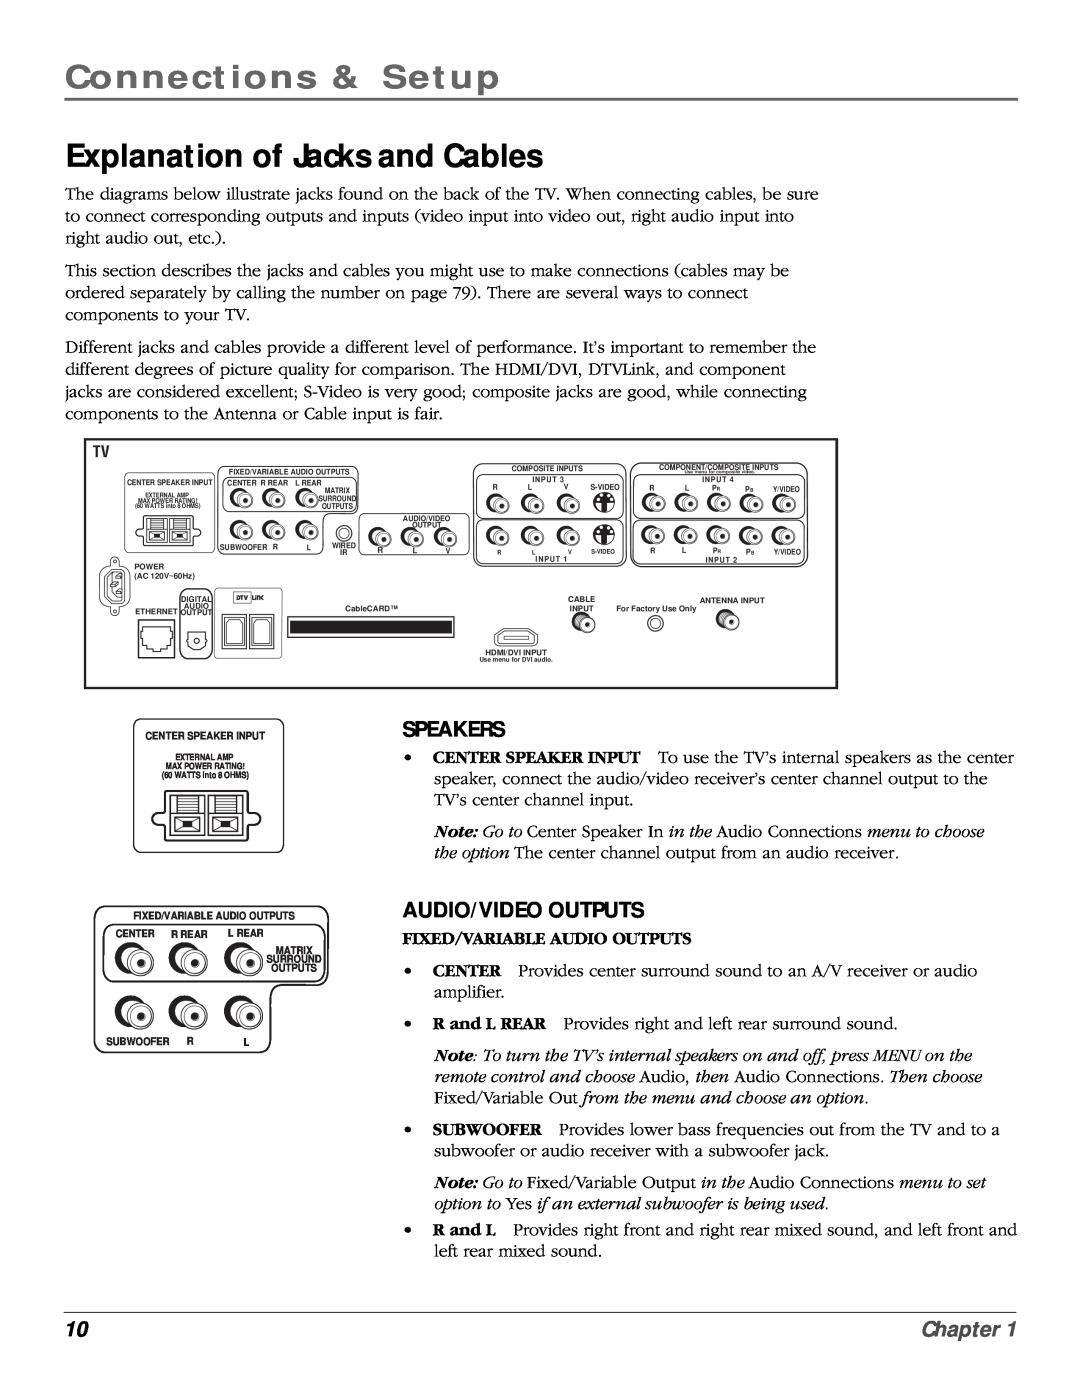 RCA scenium manual Explanation of Jacks and Cables, Speakers, Audio/Video Outputs, Fixed/Variable Audio Outputs, Chapter 